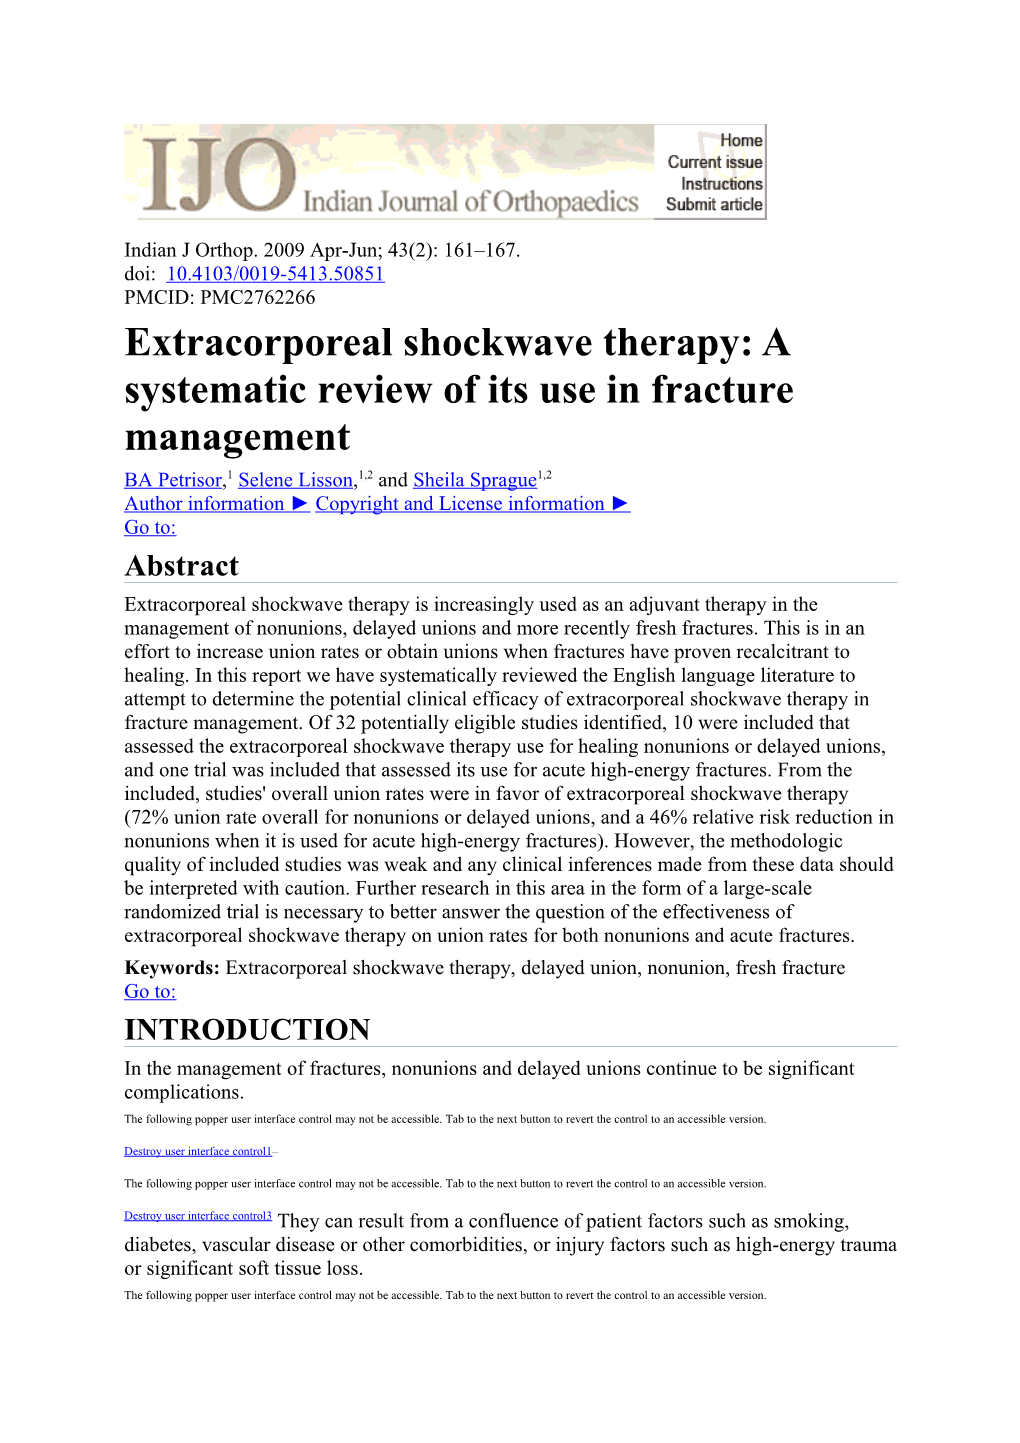 Extracorporeal Shockwave Therapy: a Systematic Review of Its Use in Fracture Management